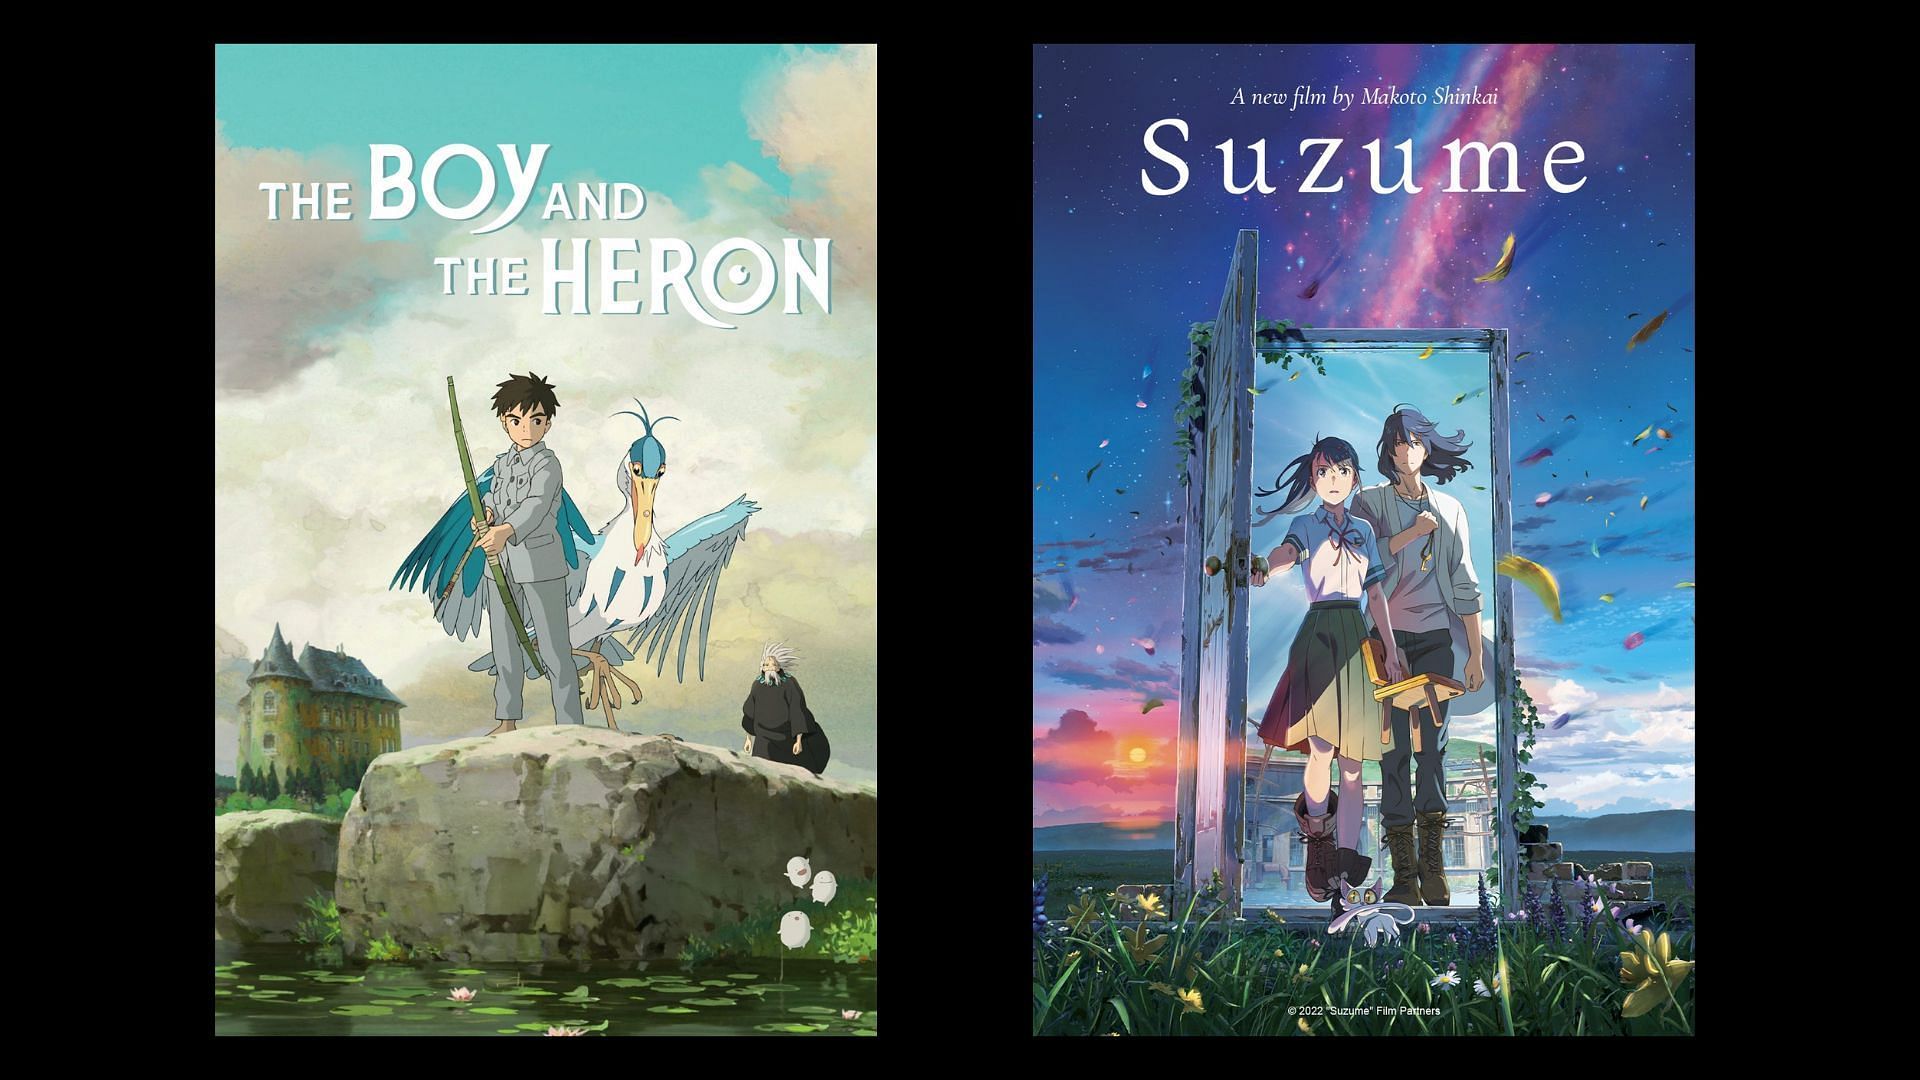 The Boy and the Heron beats Suzume as the Best Animated Film in New York Film Critics Circle